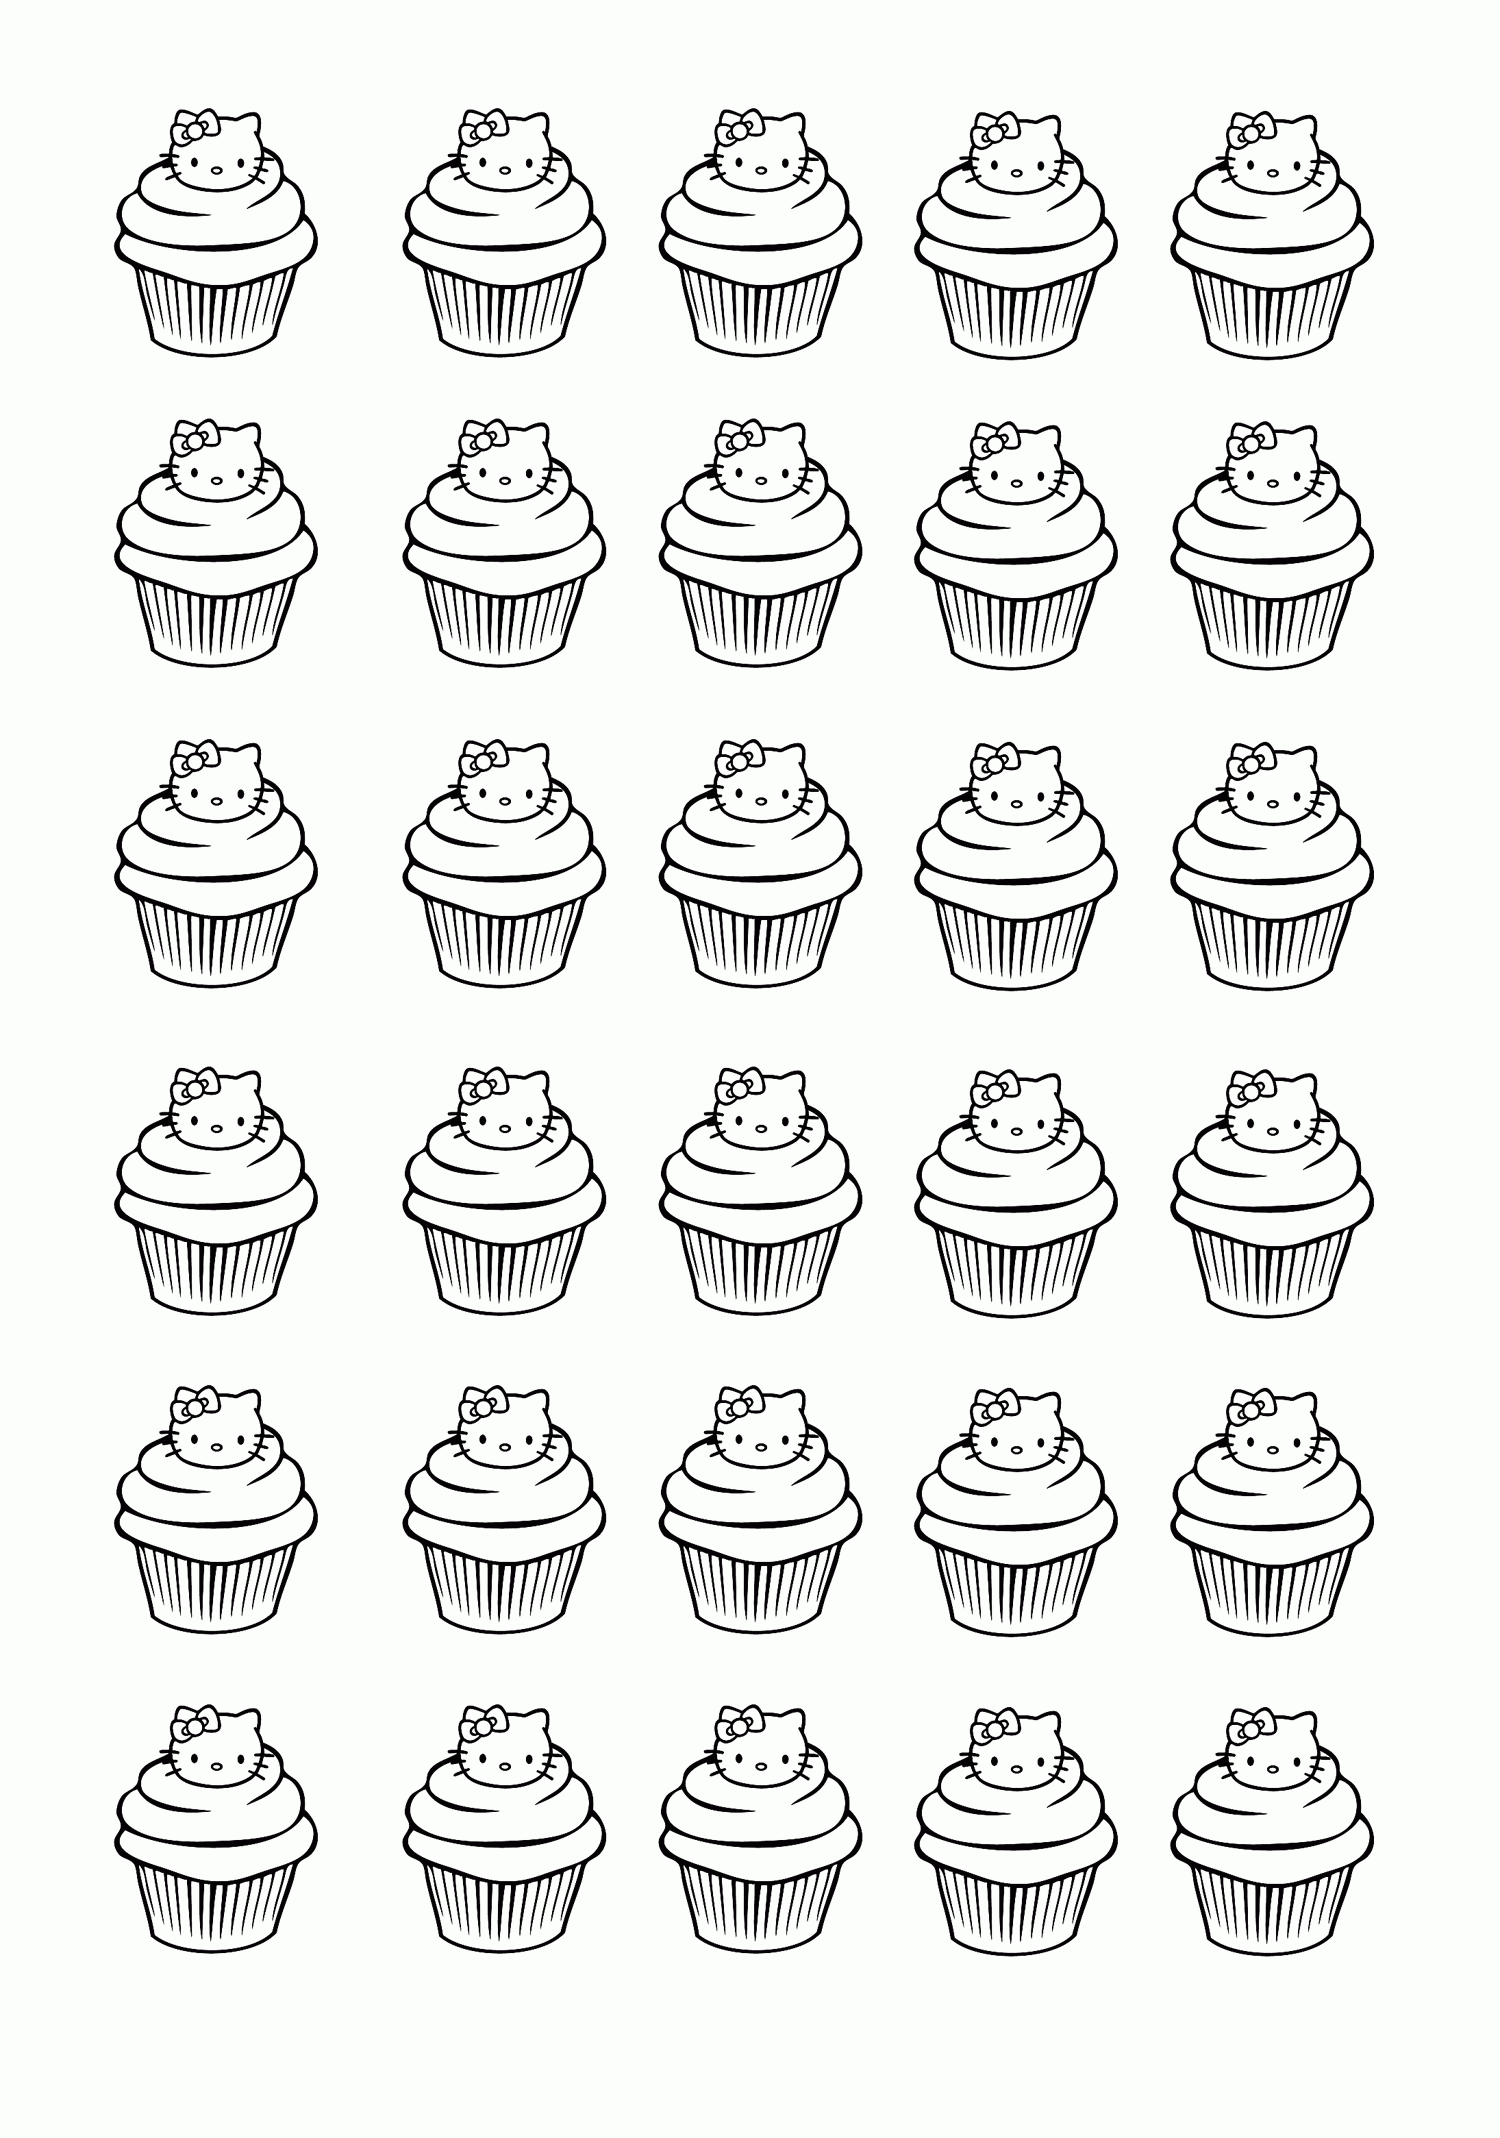 Cup Cake - Coloring Pages for adults